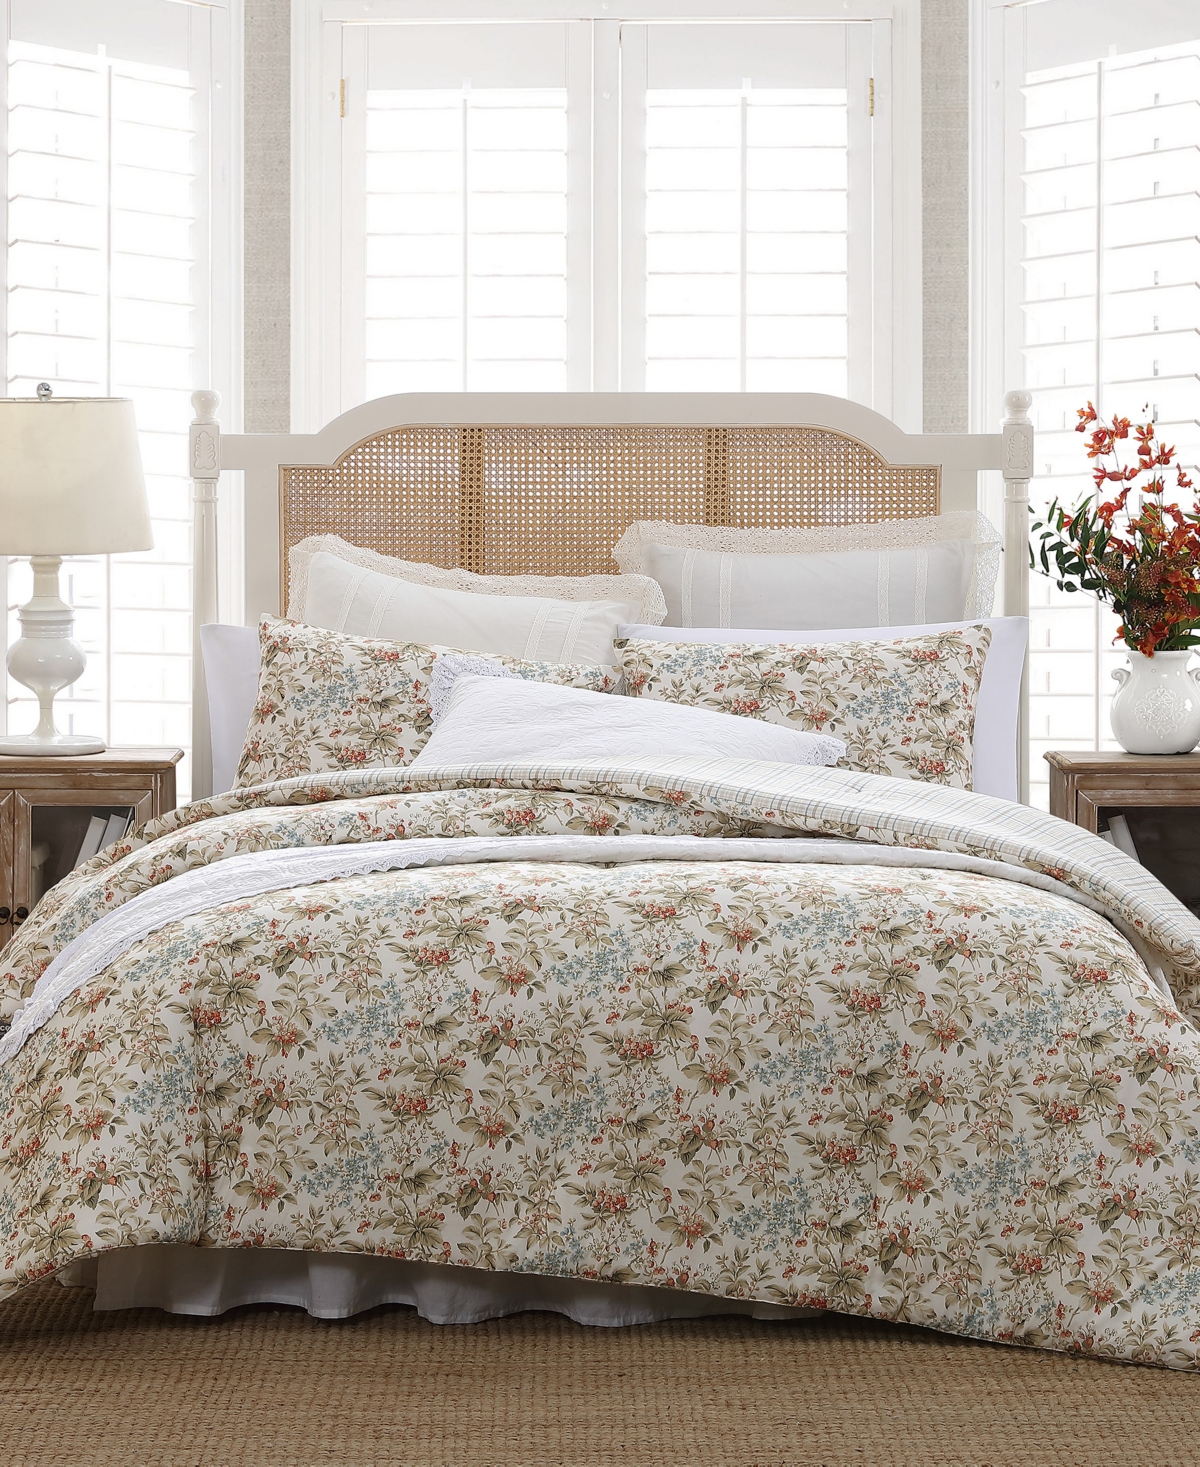 Laura Ashley Bramble Floral Cotton Reversible 2-piece Comforter Set, Twin In Persimmon,wheat